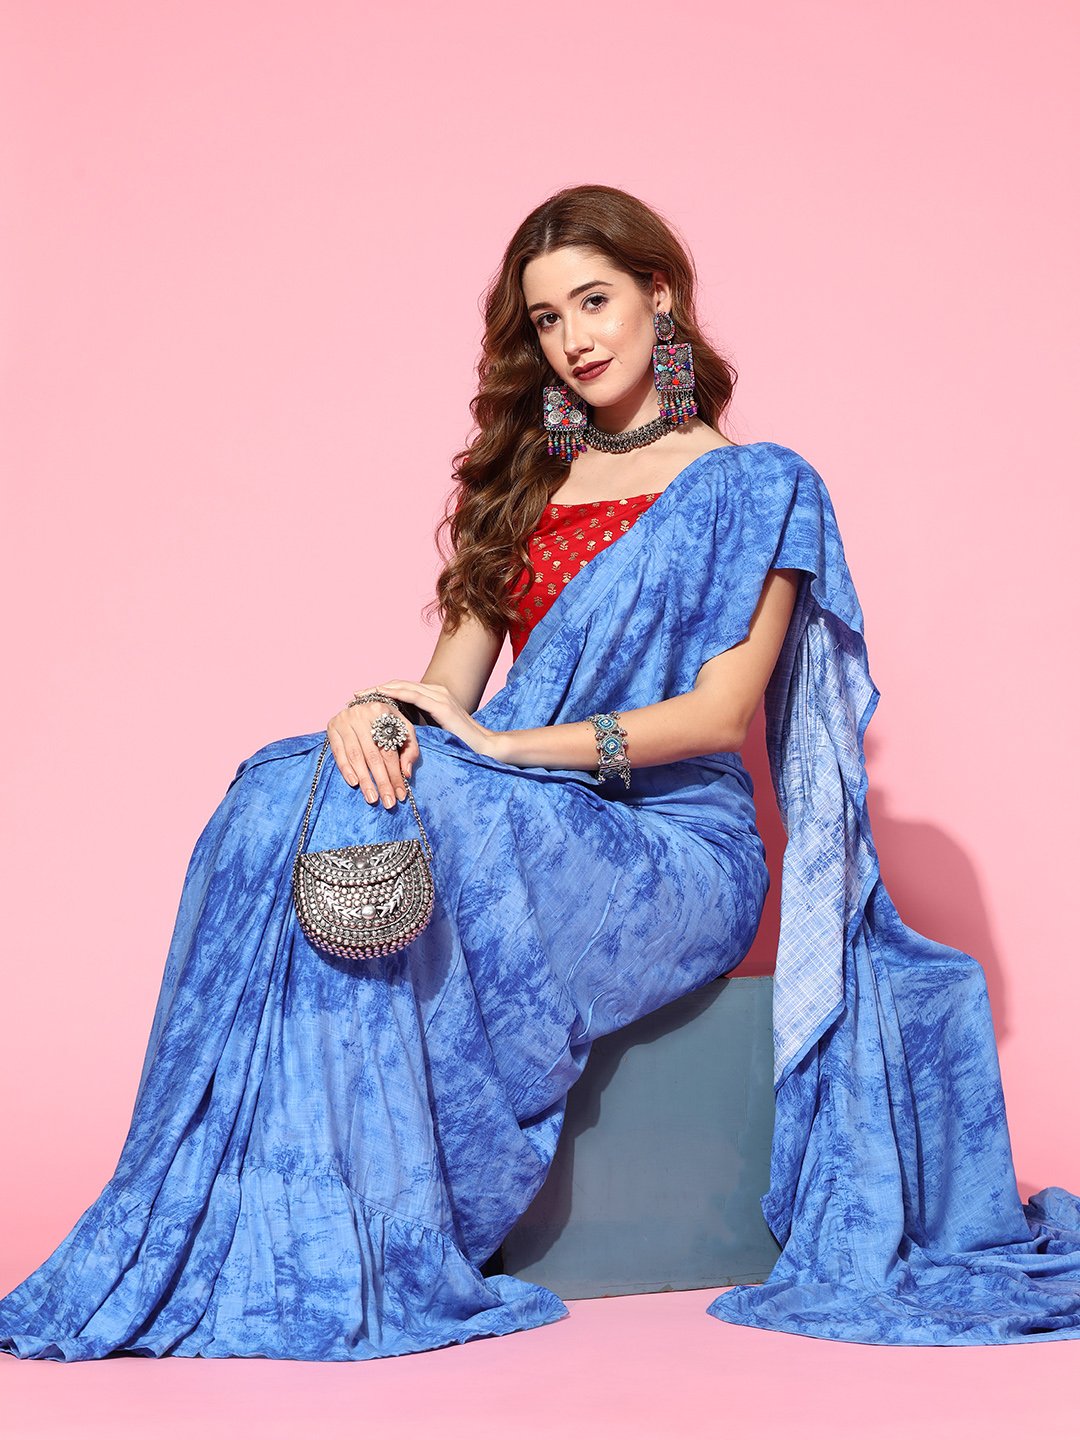 Lapis Blue Saree With Red Gold Print Blouse